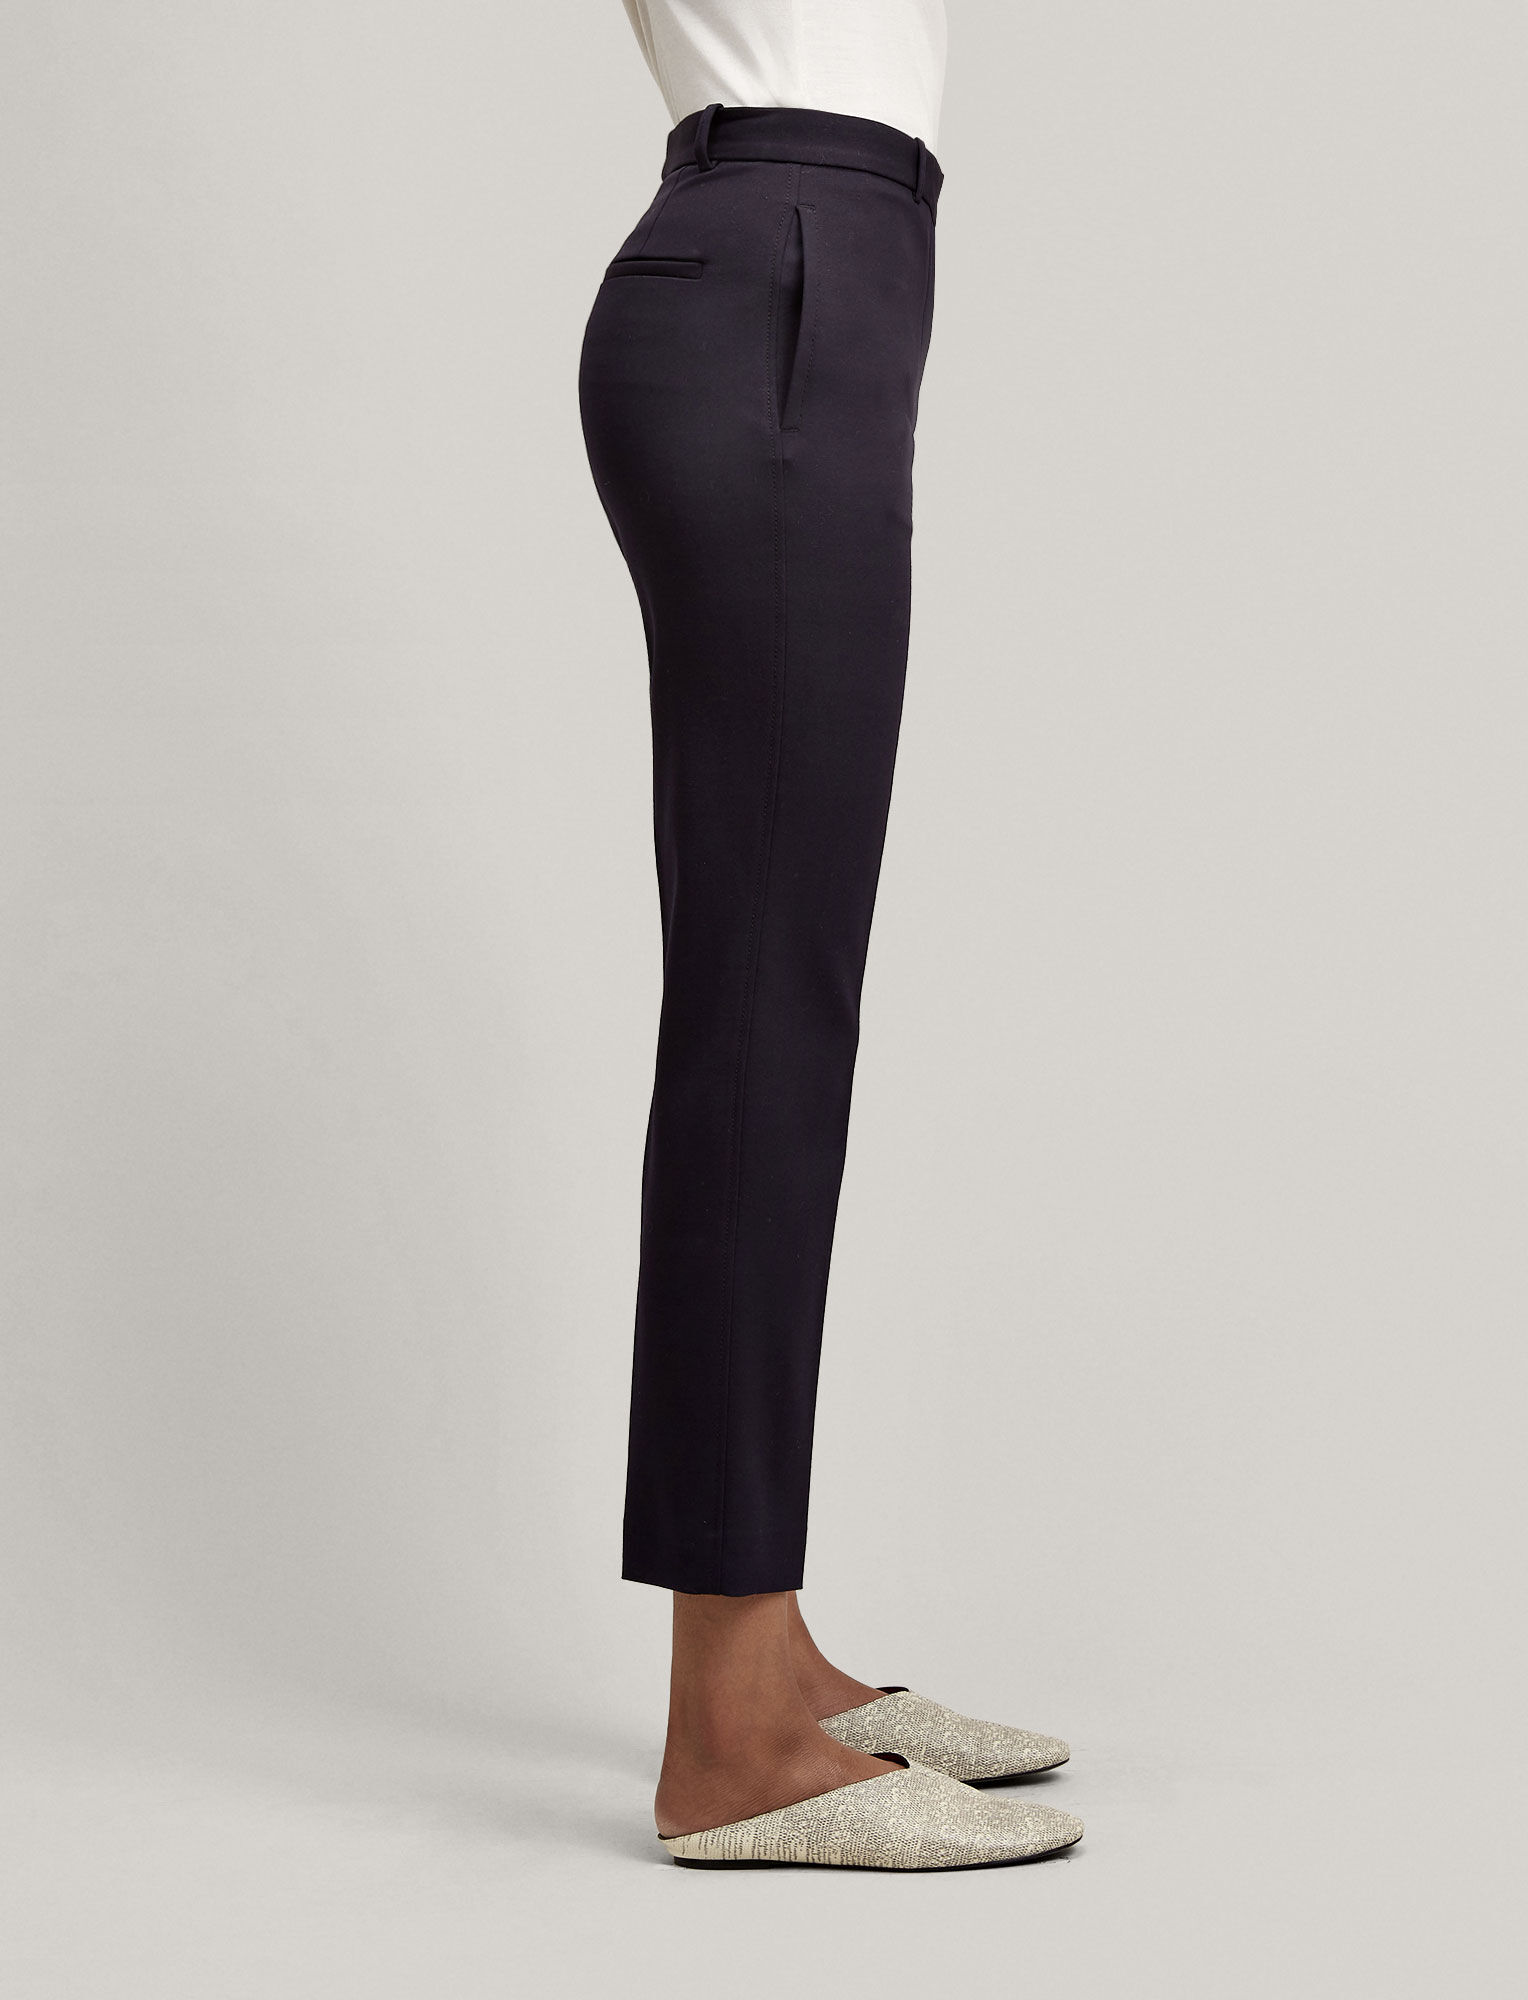 Joseph, Zoom Stretch Wool Trousers, in NAVY